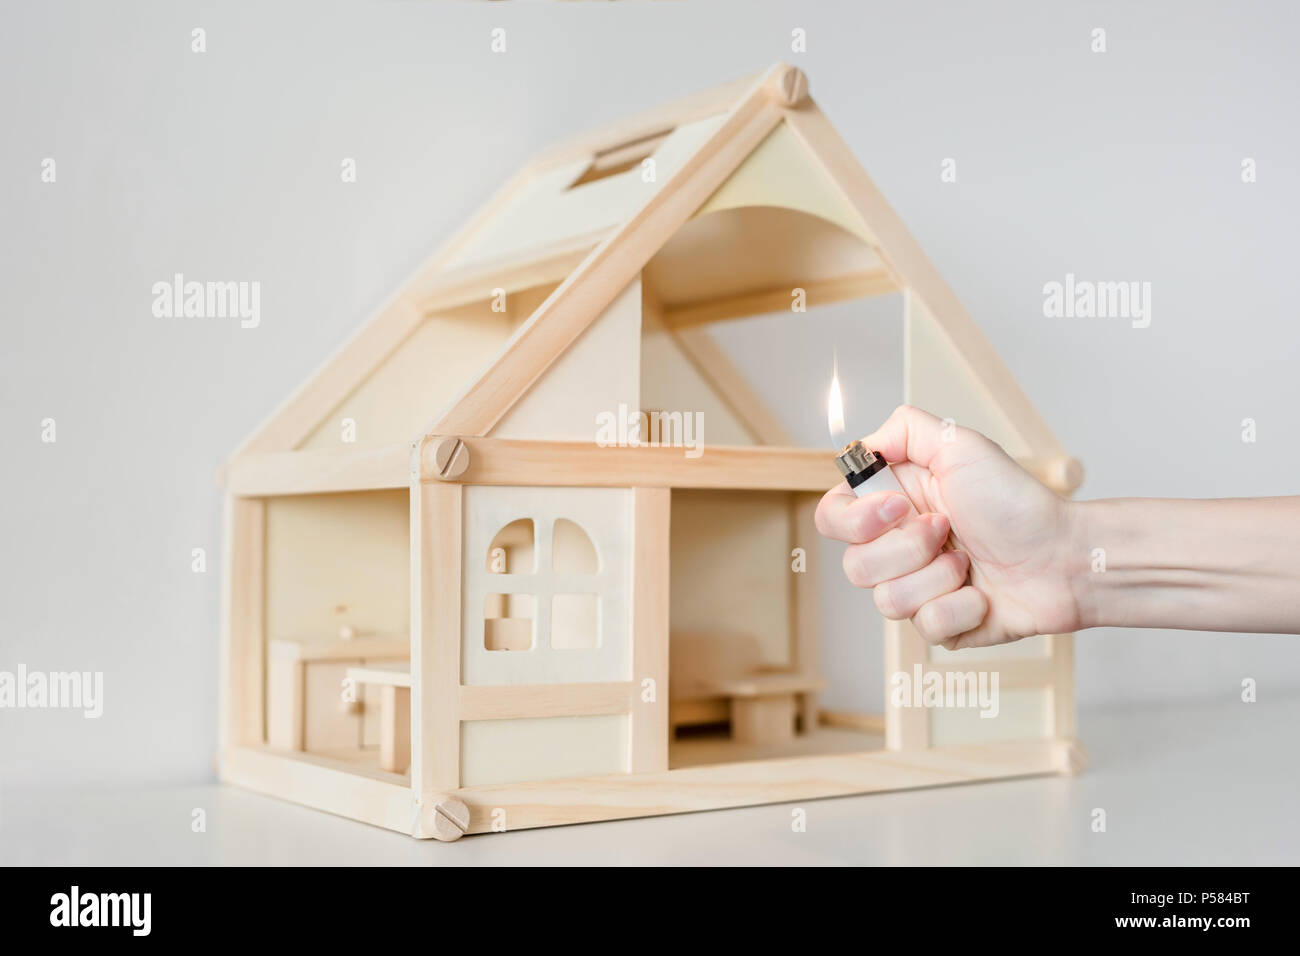 Wooden House Model Fire High Resolution Stock Photography and Images - Alamy